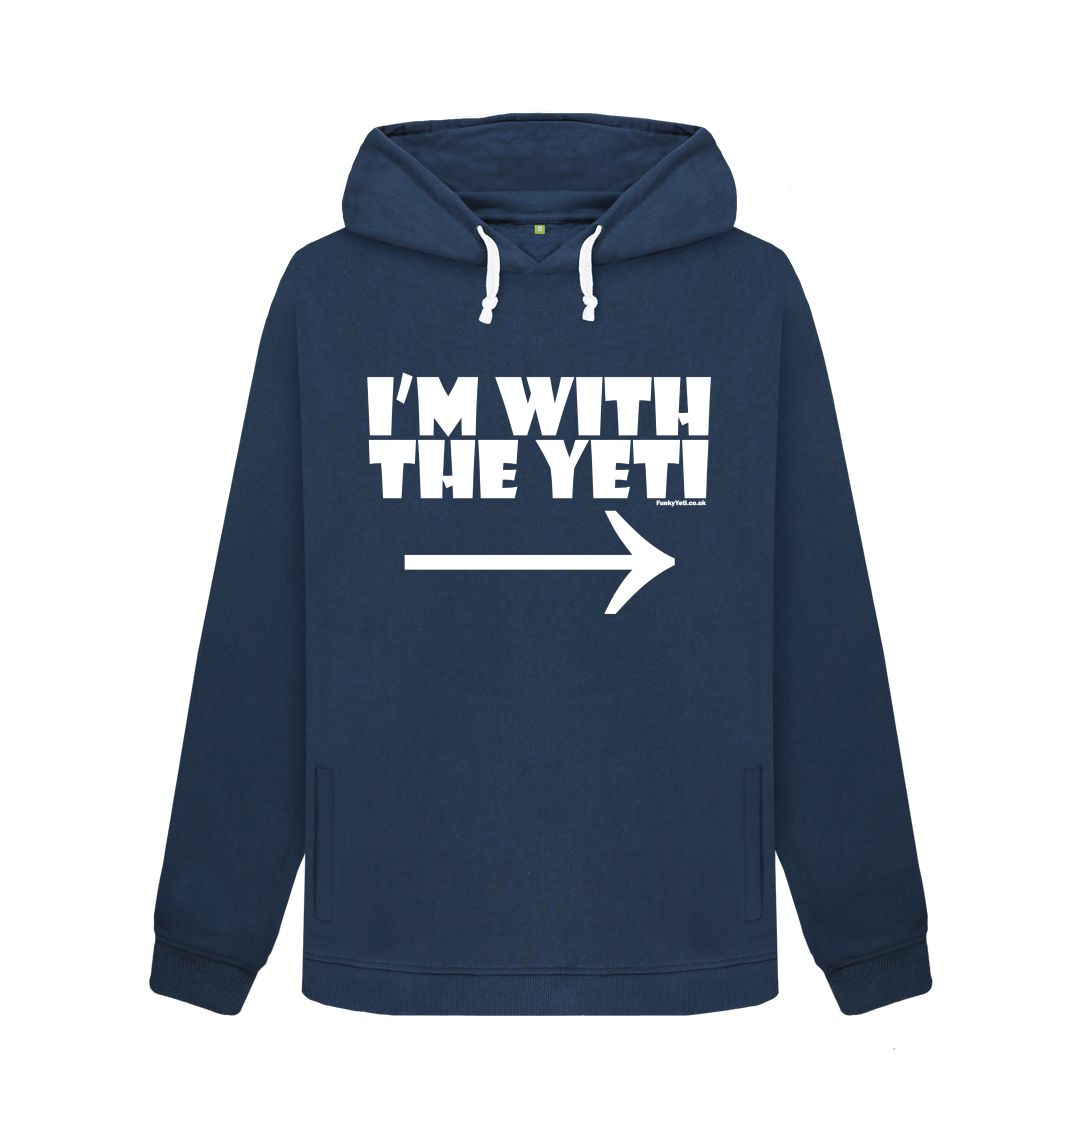 Navy Blue Funky Yeti Women's Pullover Hoodie - I'm With The Yeti